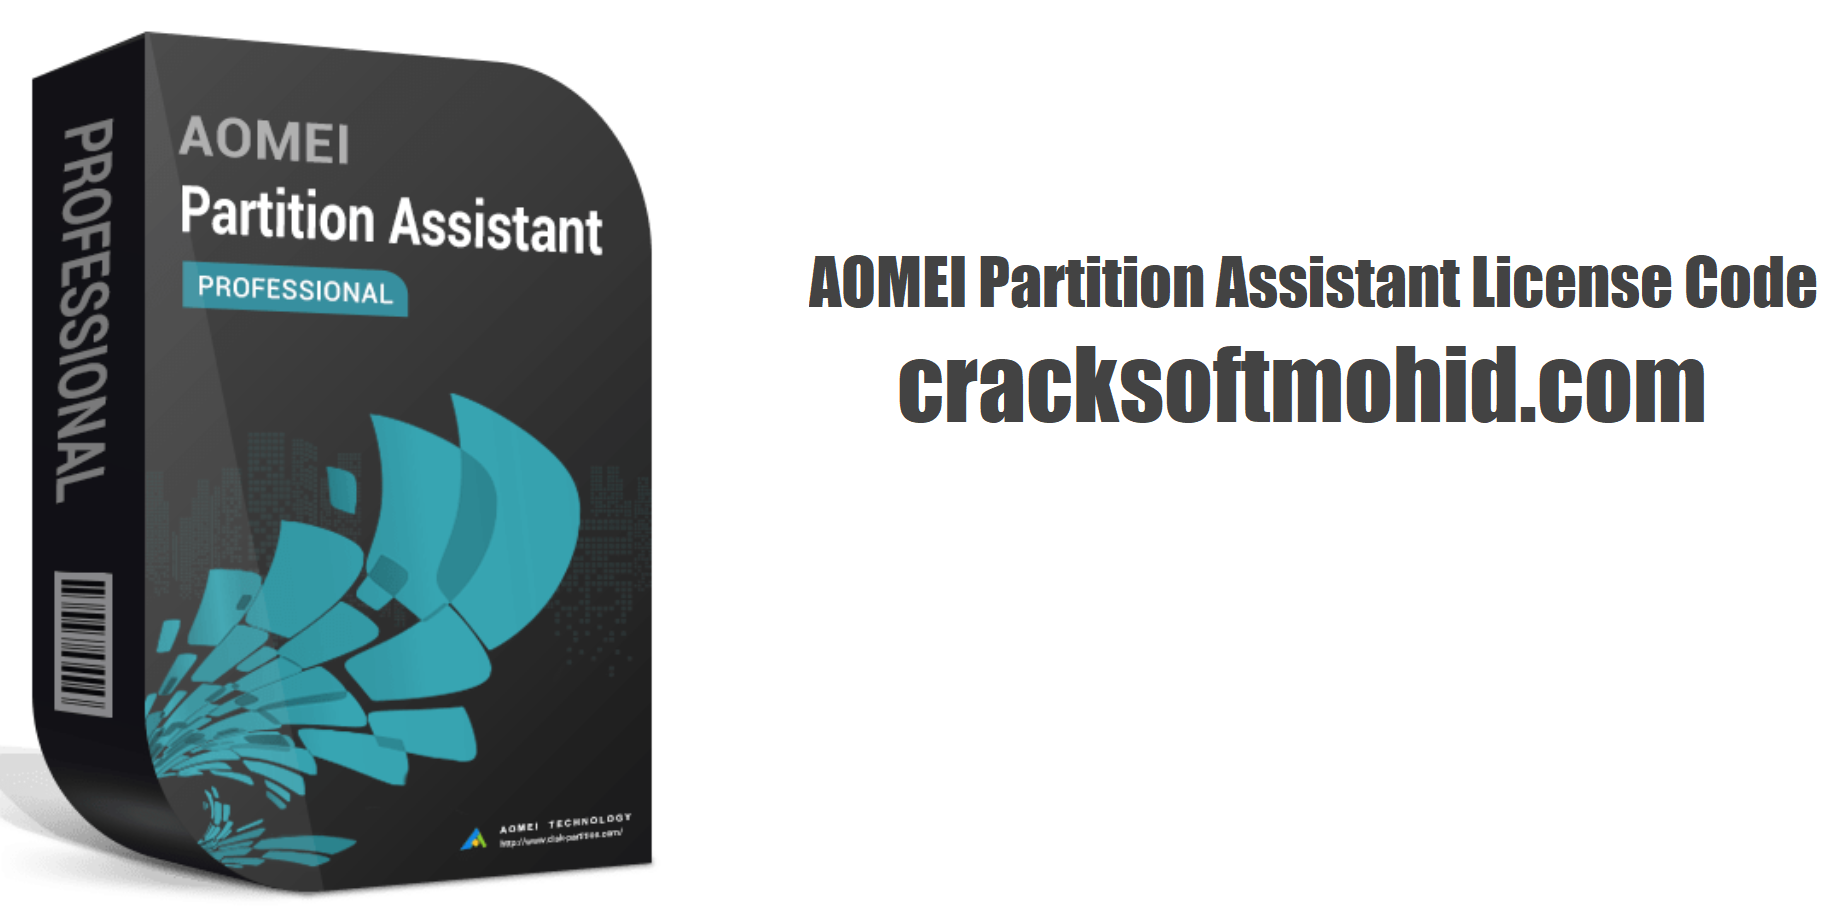 AOMEI Partition Assistant License Code [Till 2048]